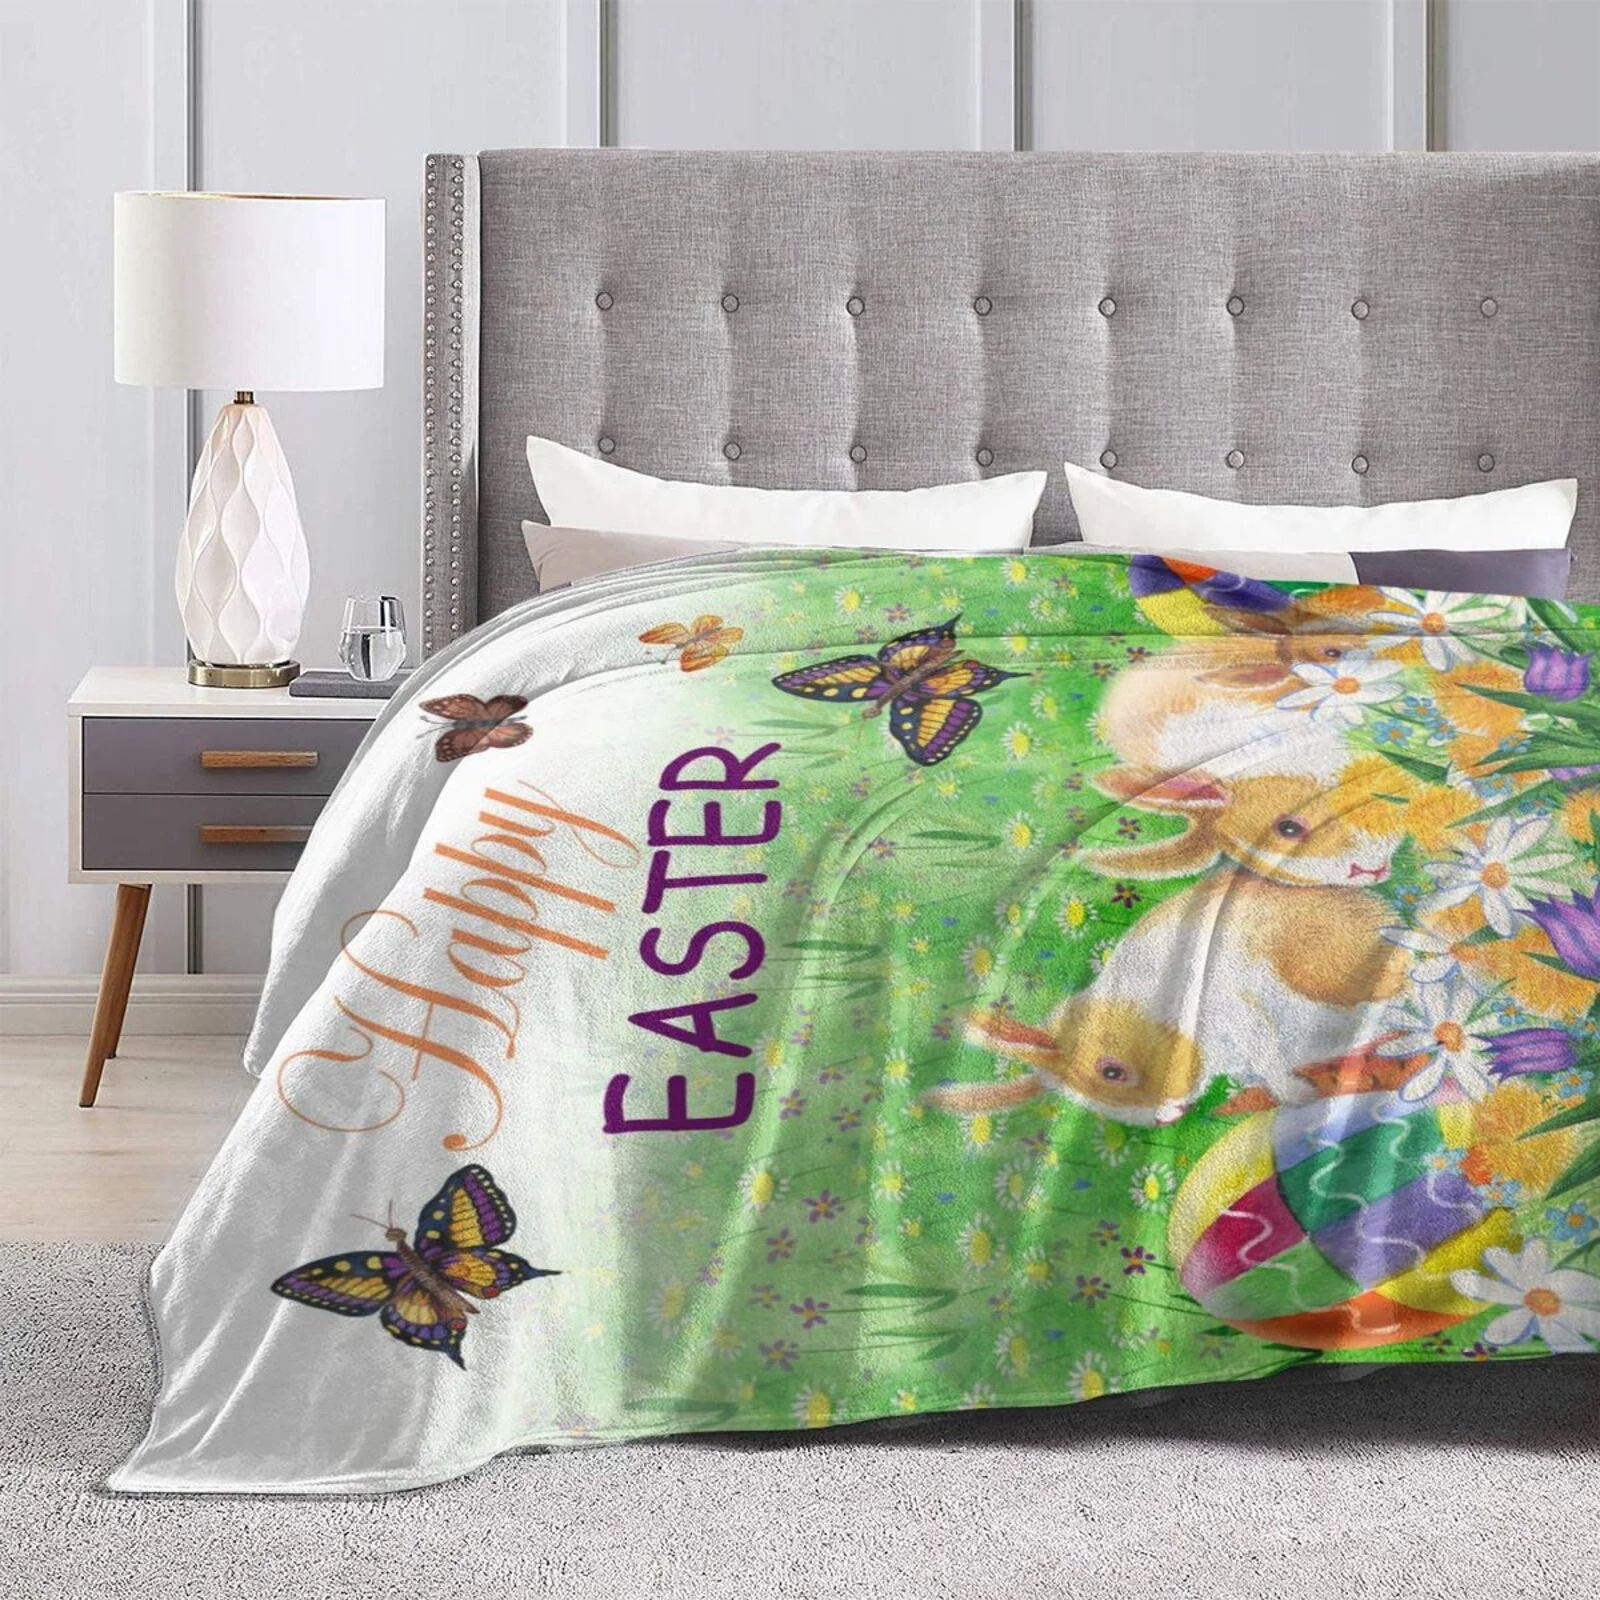 

Blankets Flannel Bed Couch Throws Lightweight All Seasons Suitable Women Men Kids Peacock Day of Holiday Easter Rabbit Gift Idea